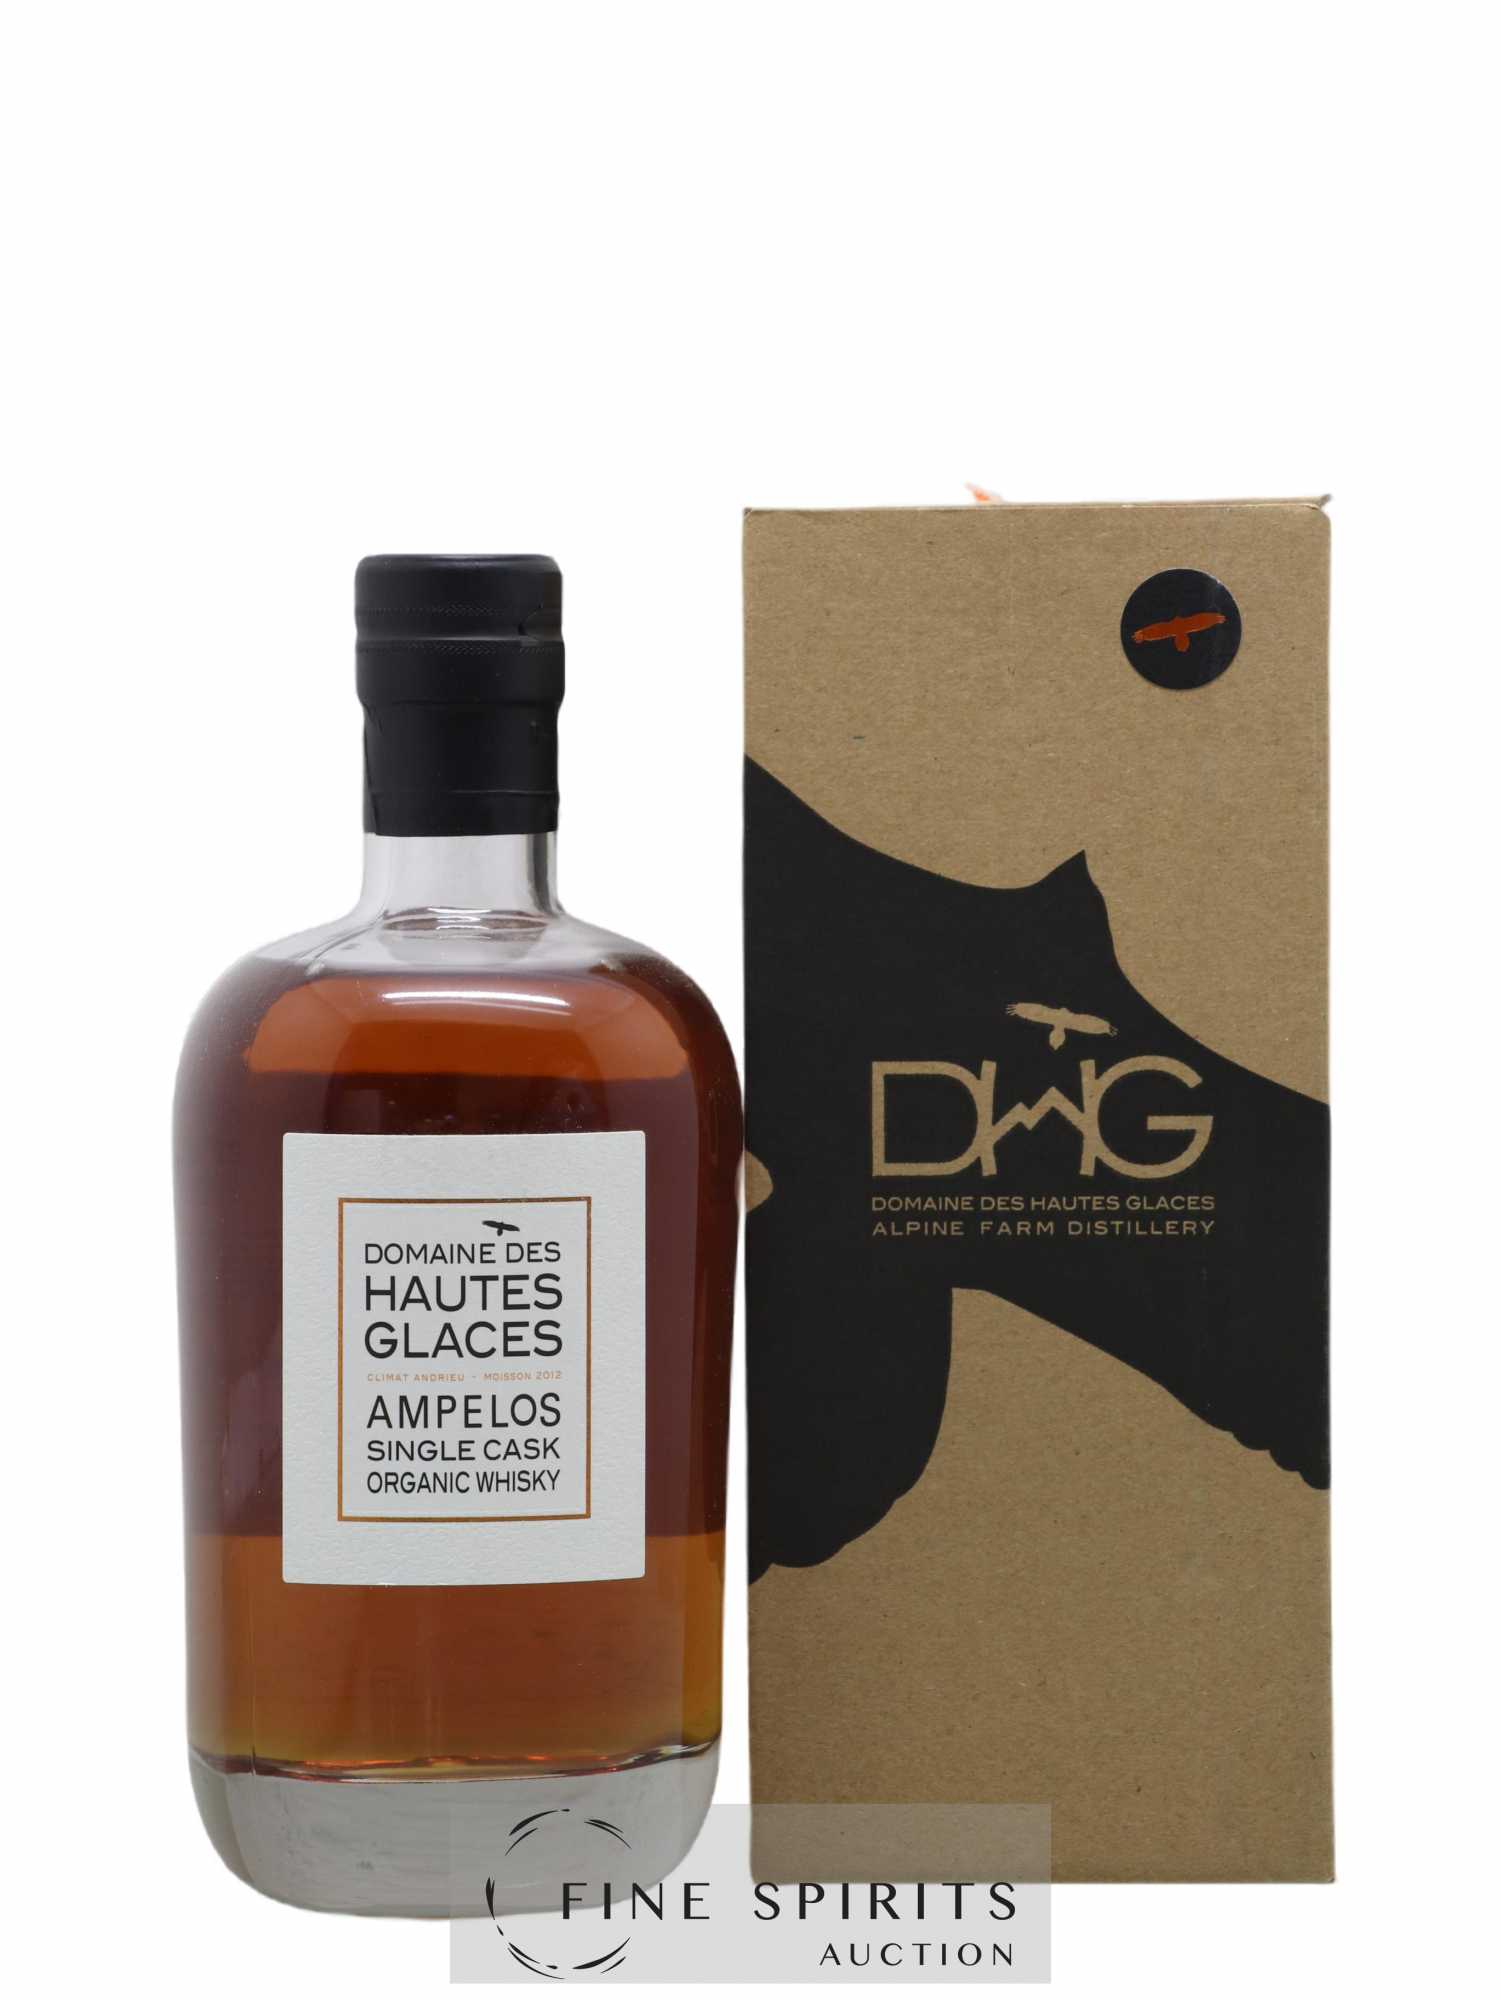 Domaine des Hautes Glaces 6 years 2012 Of. Ampelos Single Cask - One of 584 